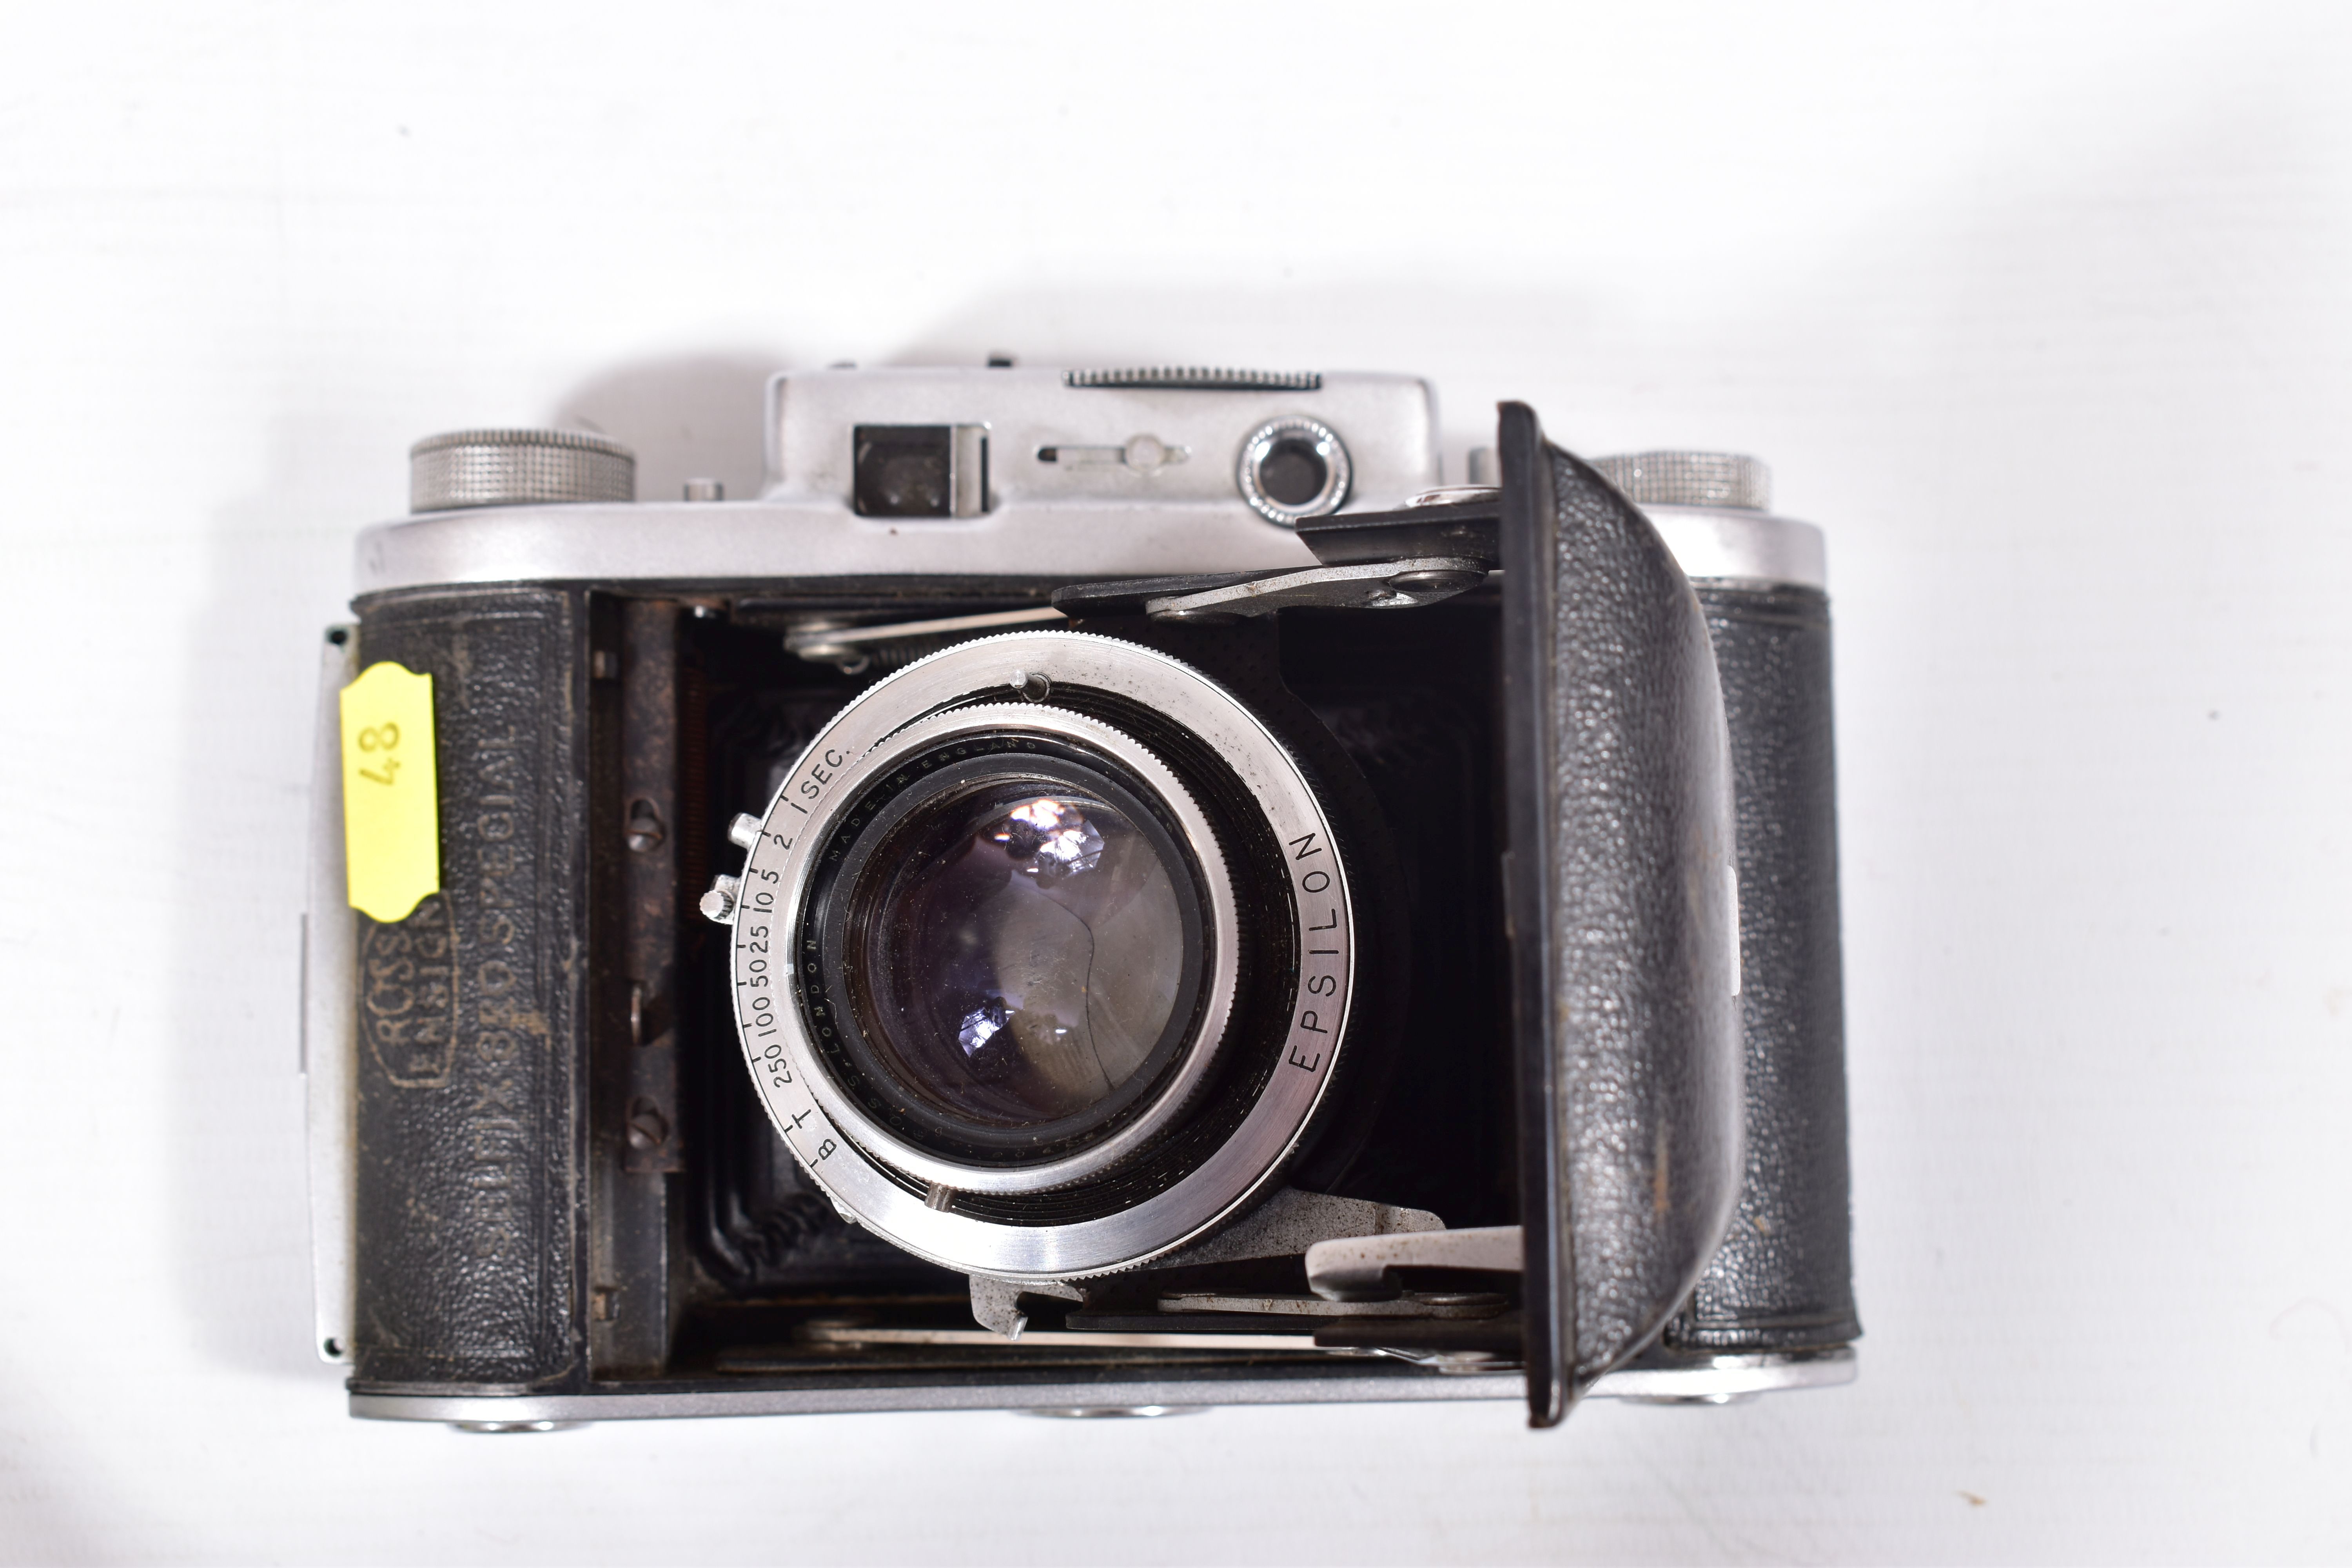 A WRAYFLEX 1 FILM CAMERA fitted with a Wray 50mm f2.8 lens , a Zeiss Ikon Contessa Nettel Picolette, - Image 5 of 8